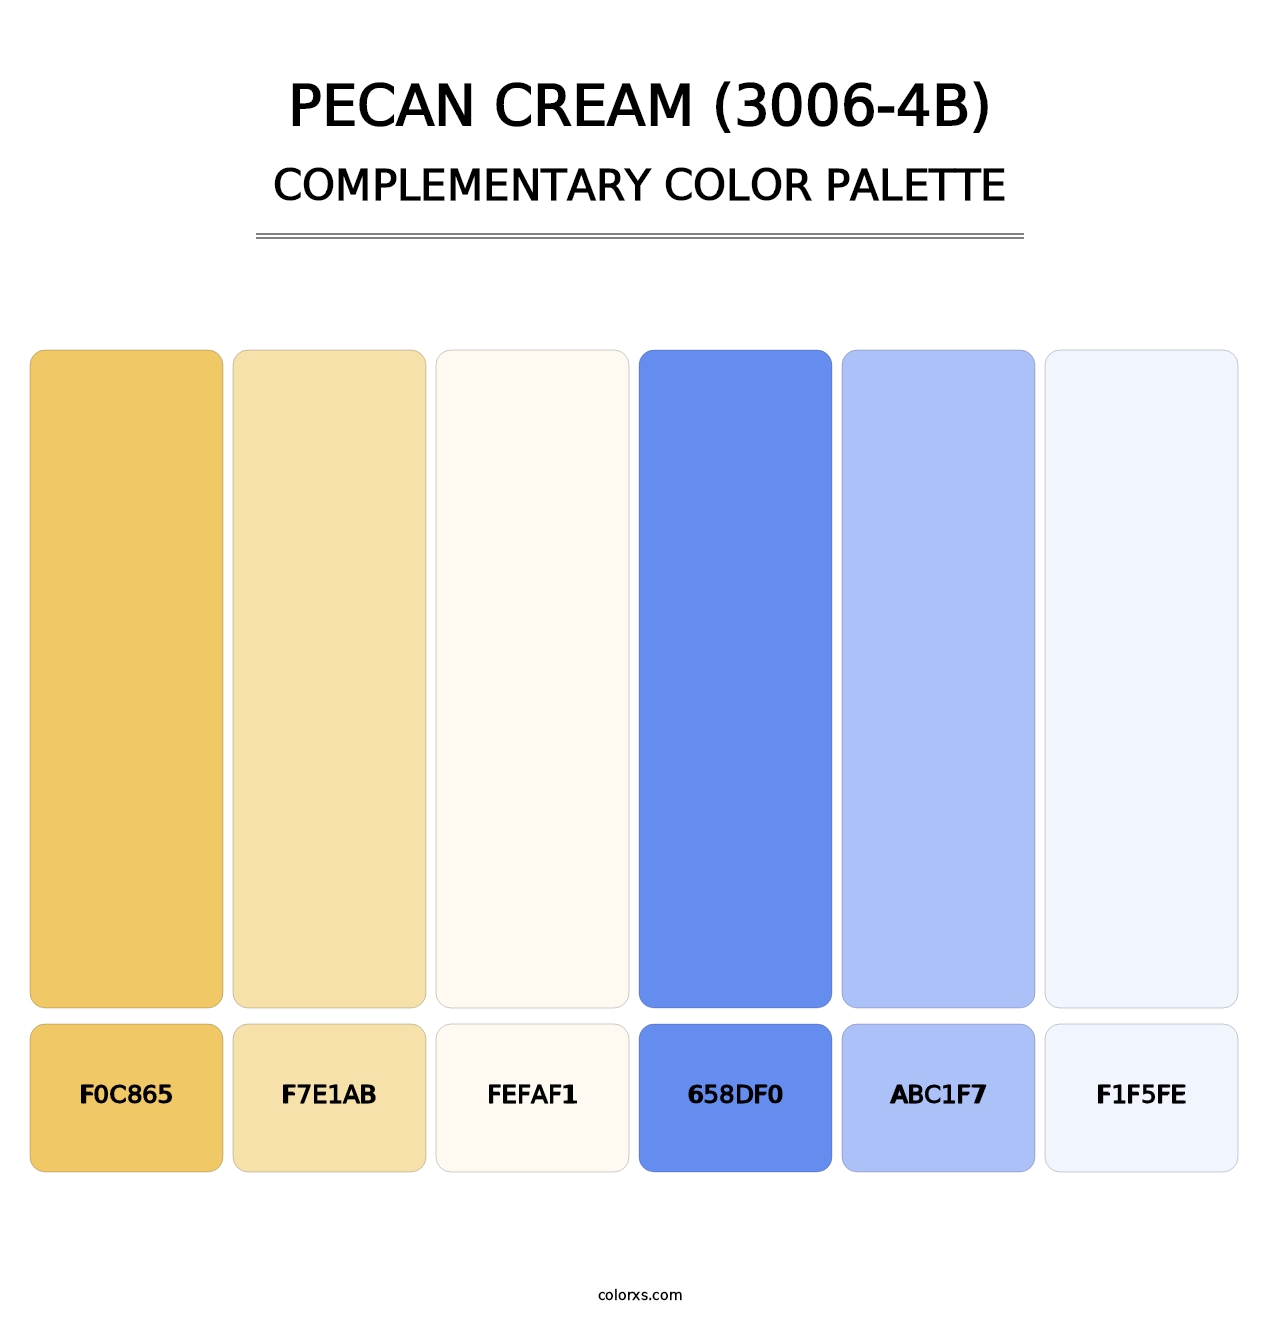 Pecan Cream (3006-4B) - Complementary Color Palette